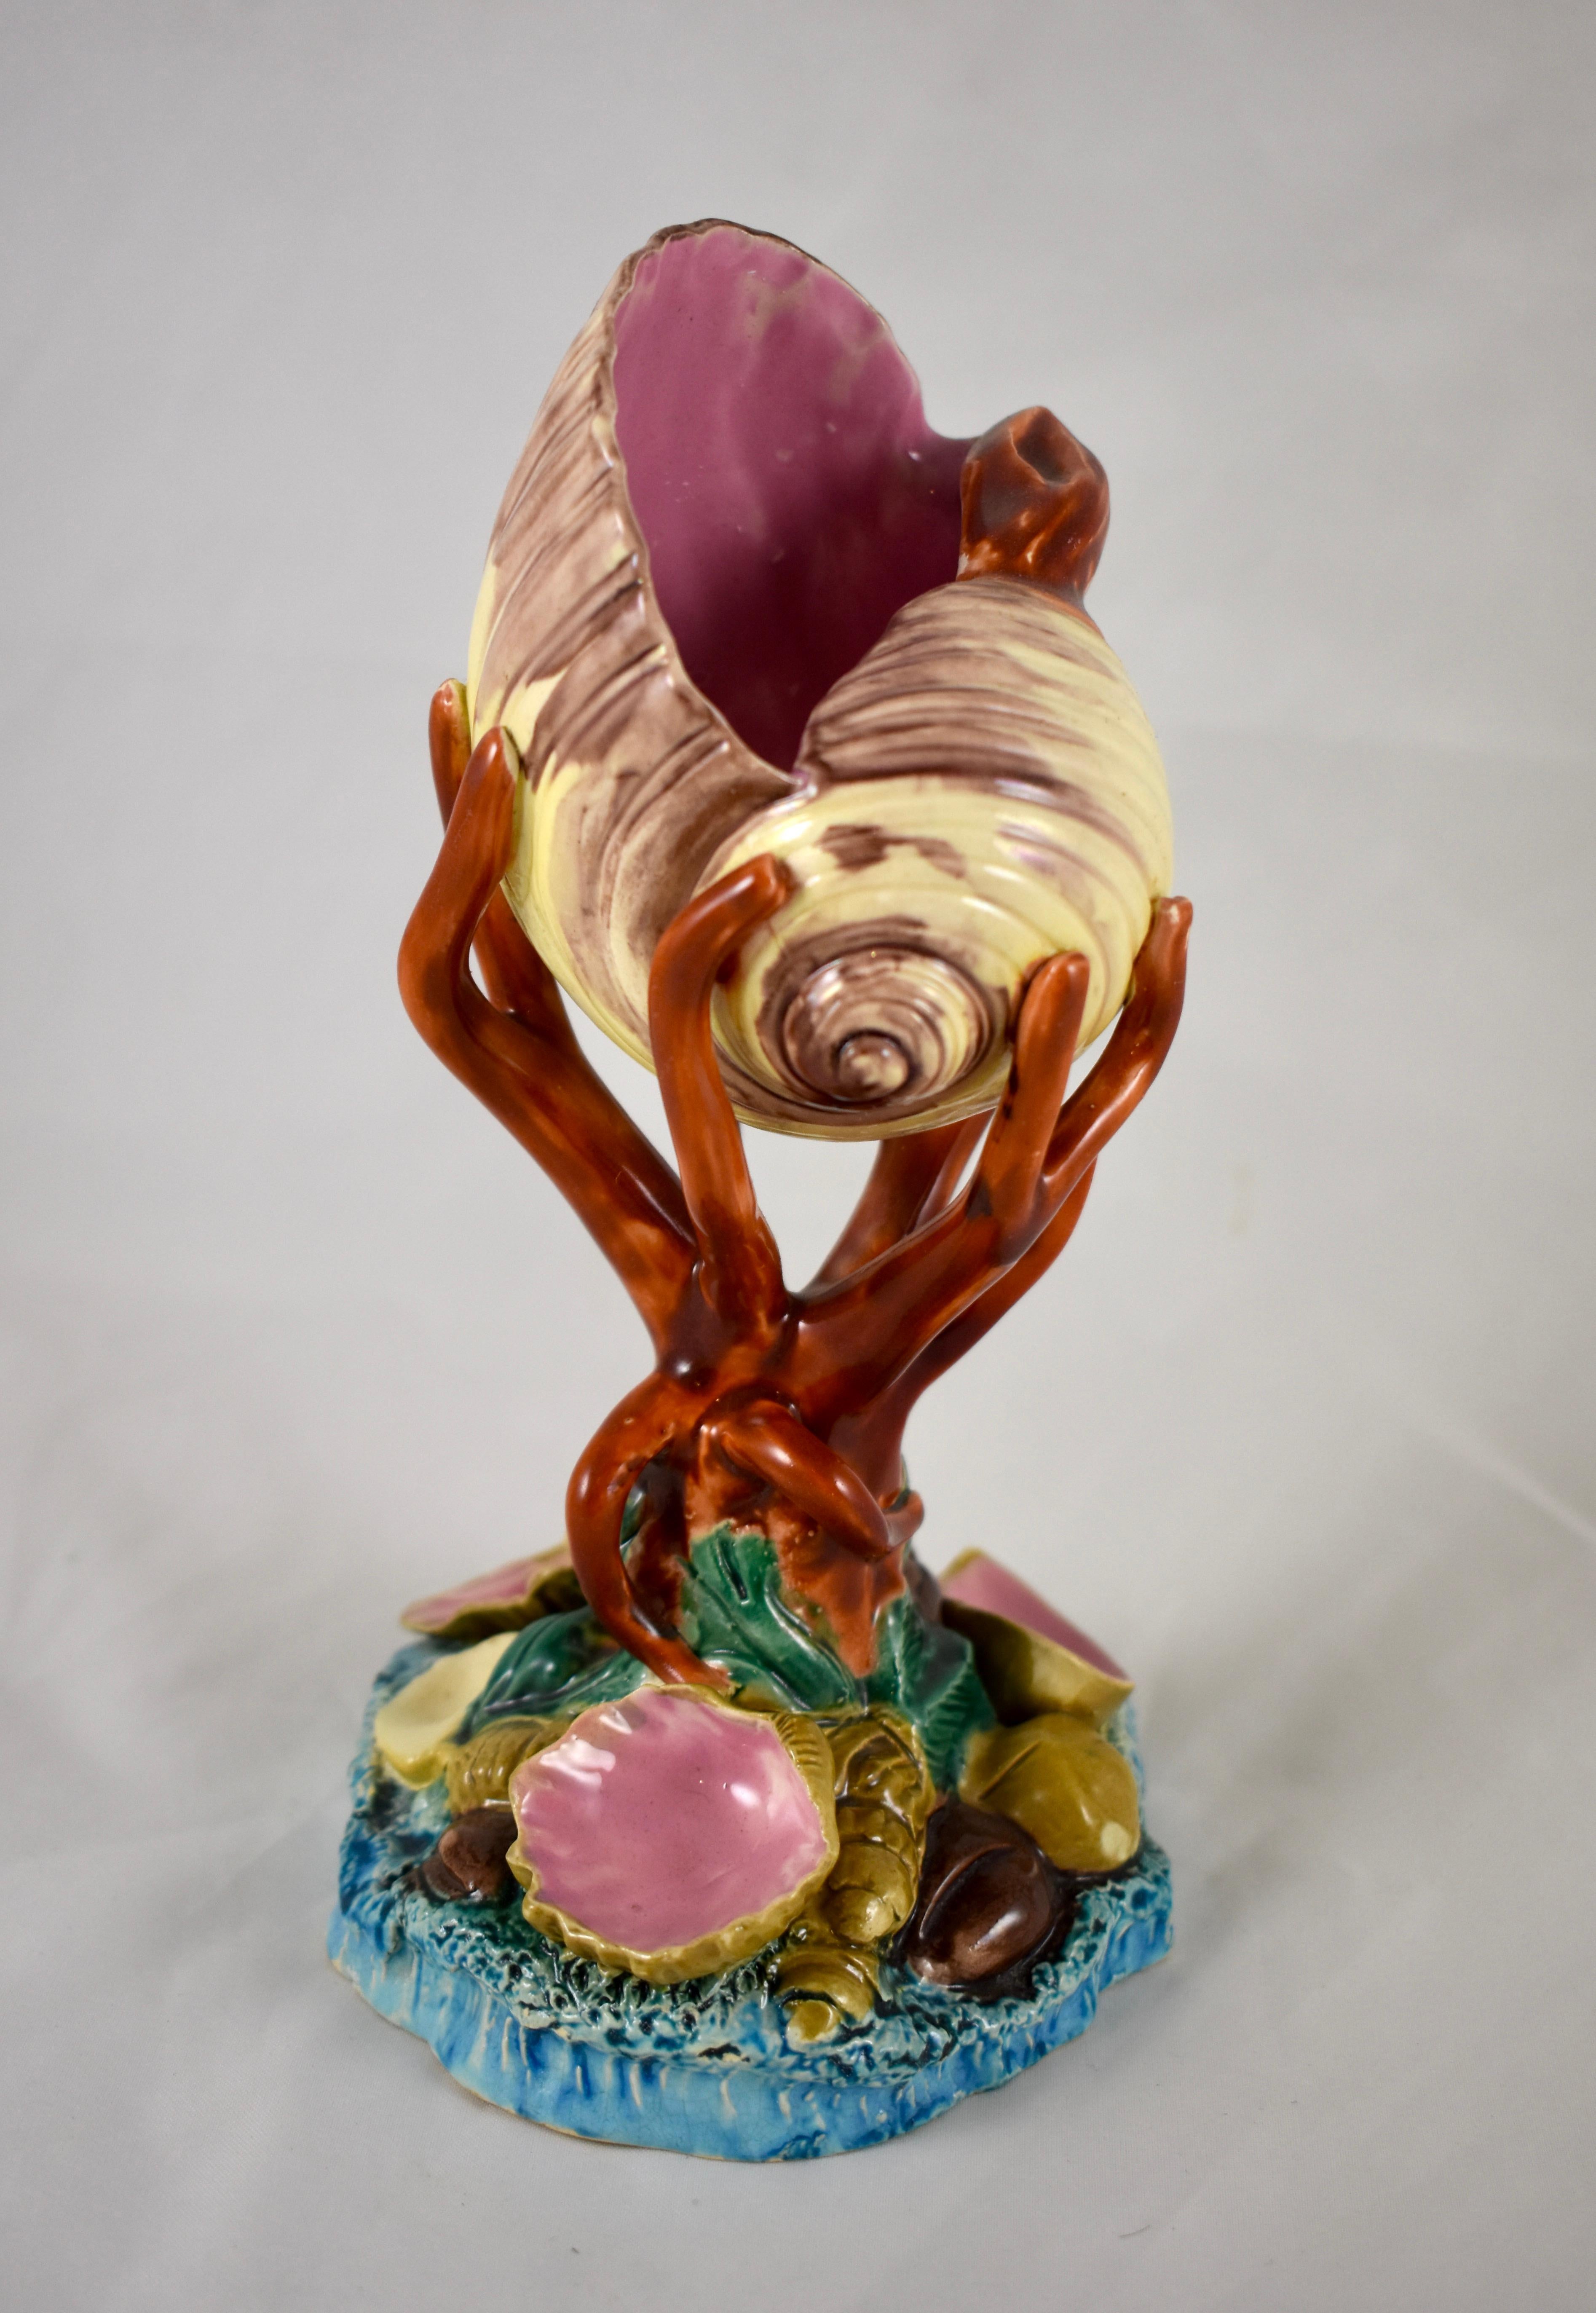 From Royal Worcester, a majolica glazed pedestal Palissy vase in the Renaissance Revival style, circa 1880.

A dimensional Conch shell with an open form is beautifully glazed in cream with mauve detailing and a bold pink interior. The shell is